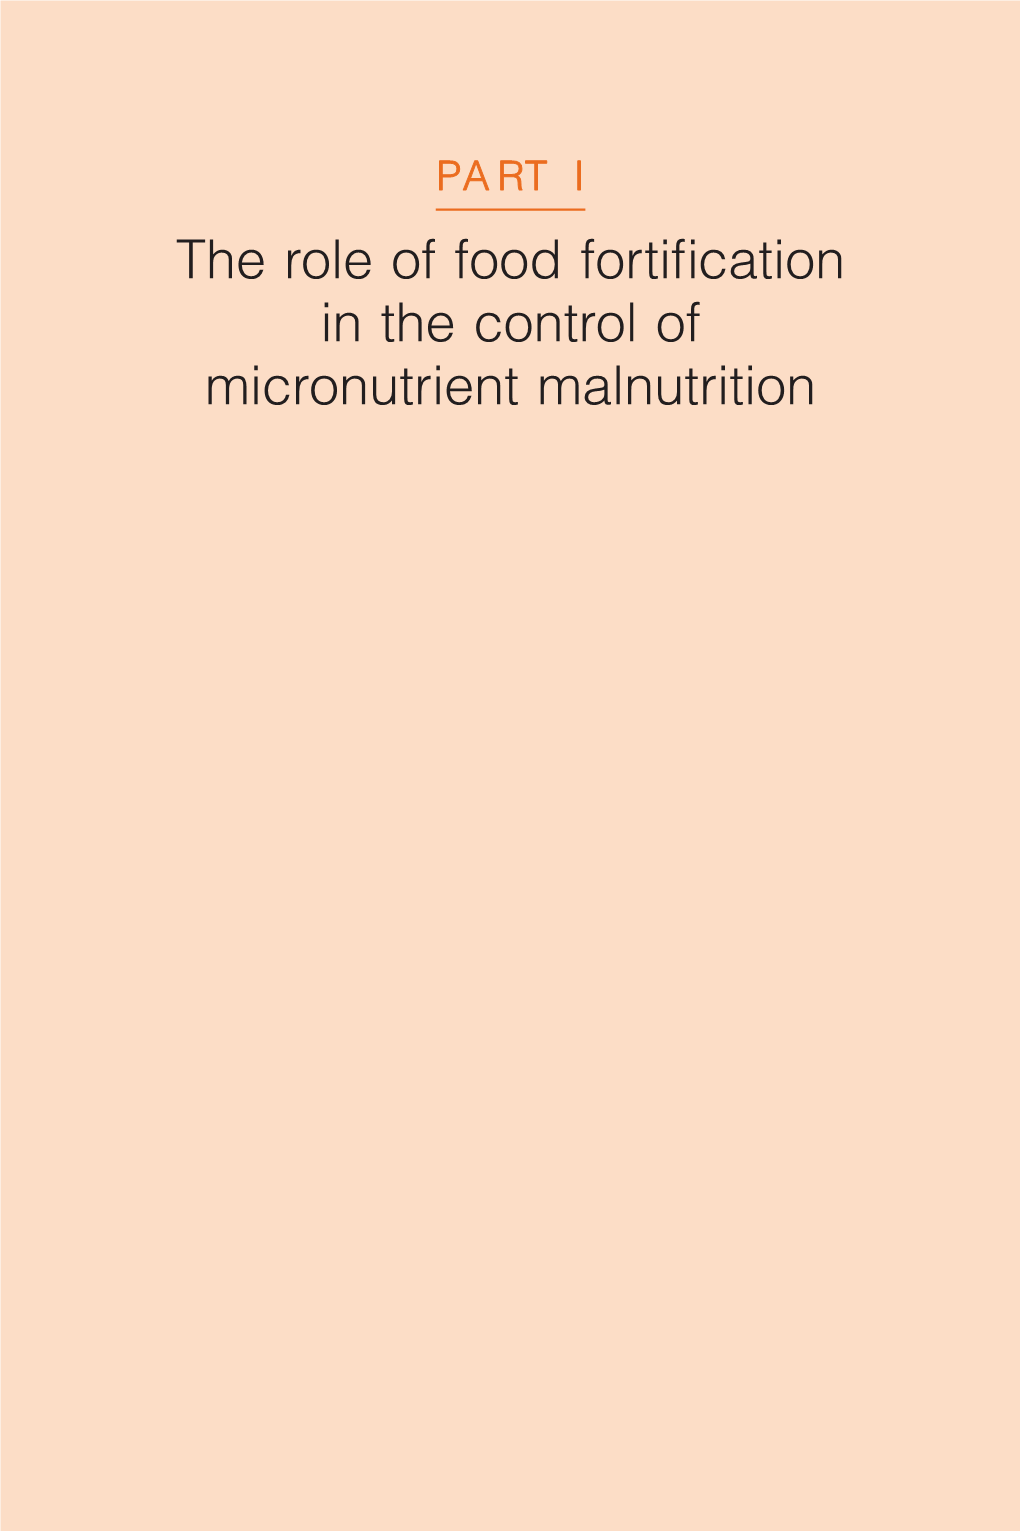 The Role of Food Fortification in the Control of Micronutrient Malnutrition